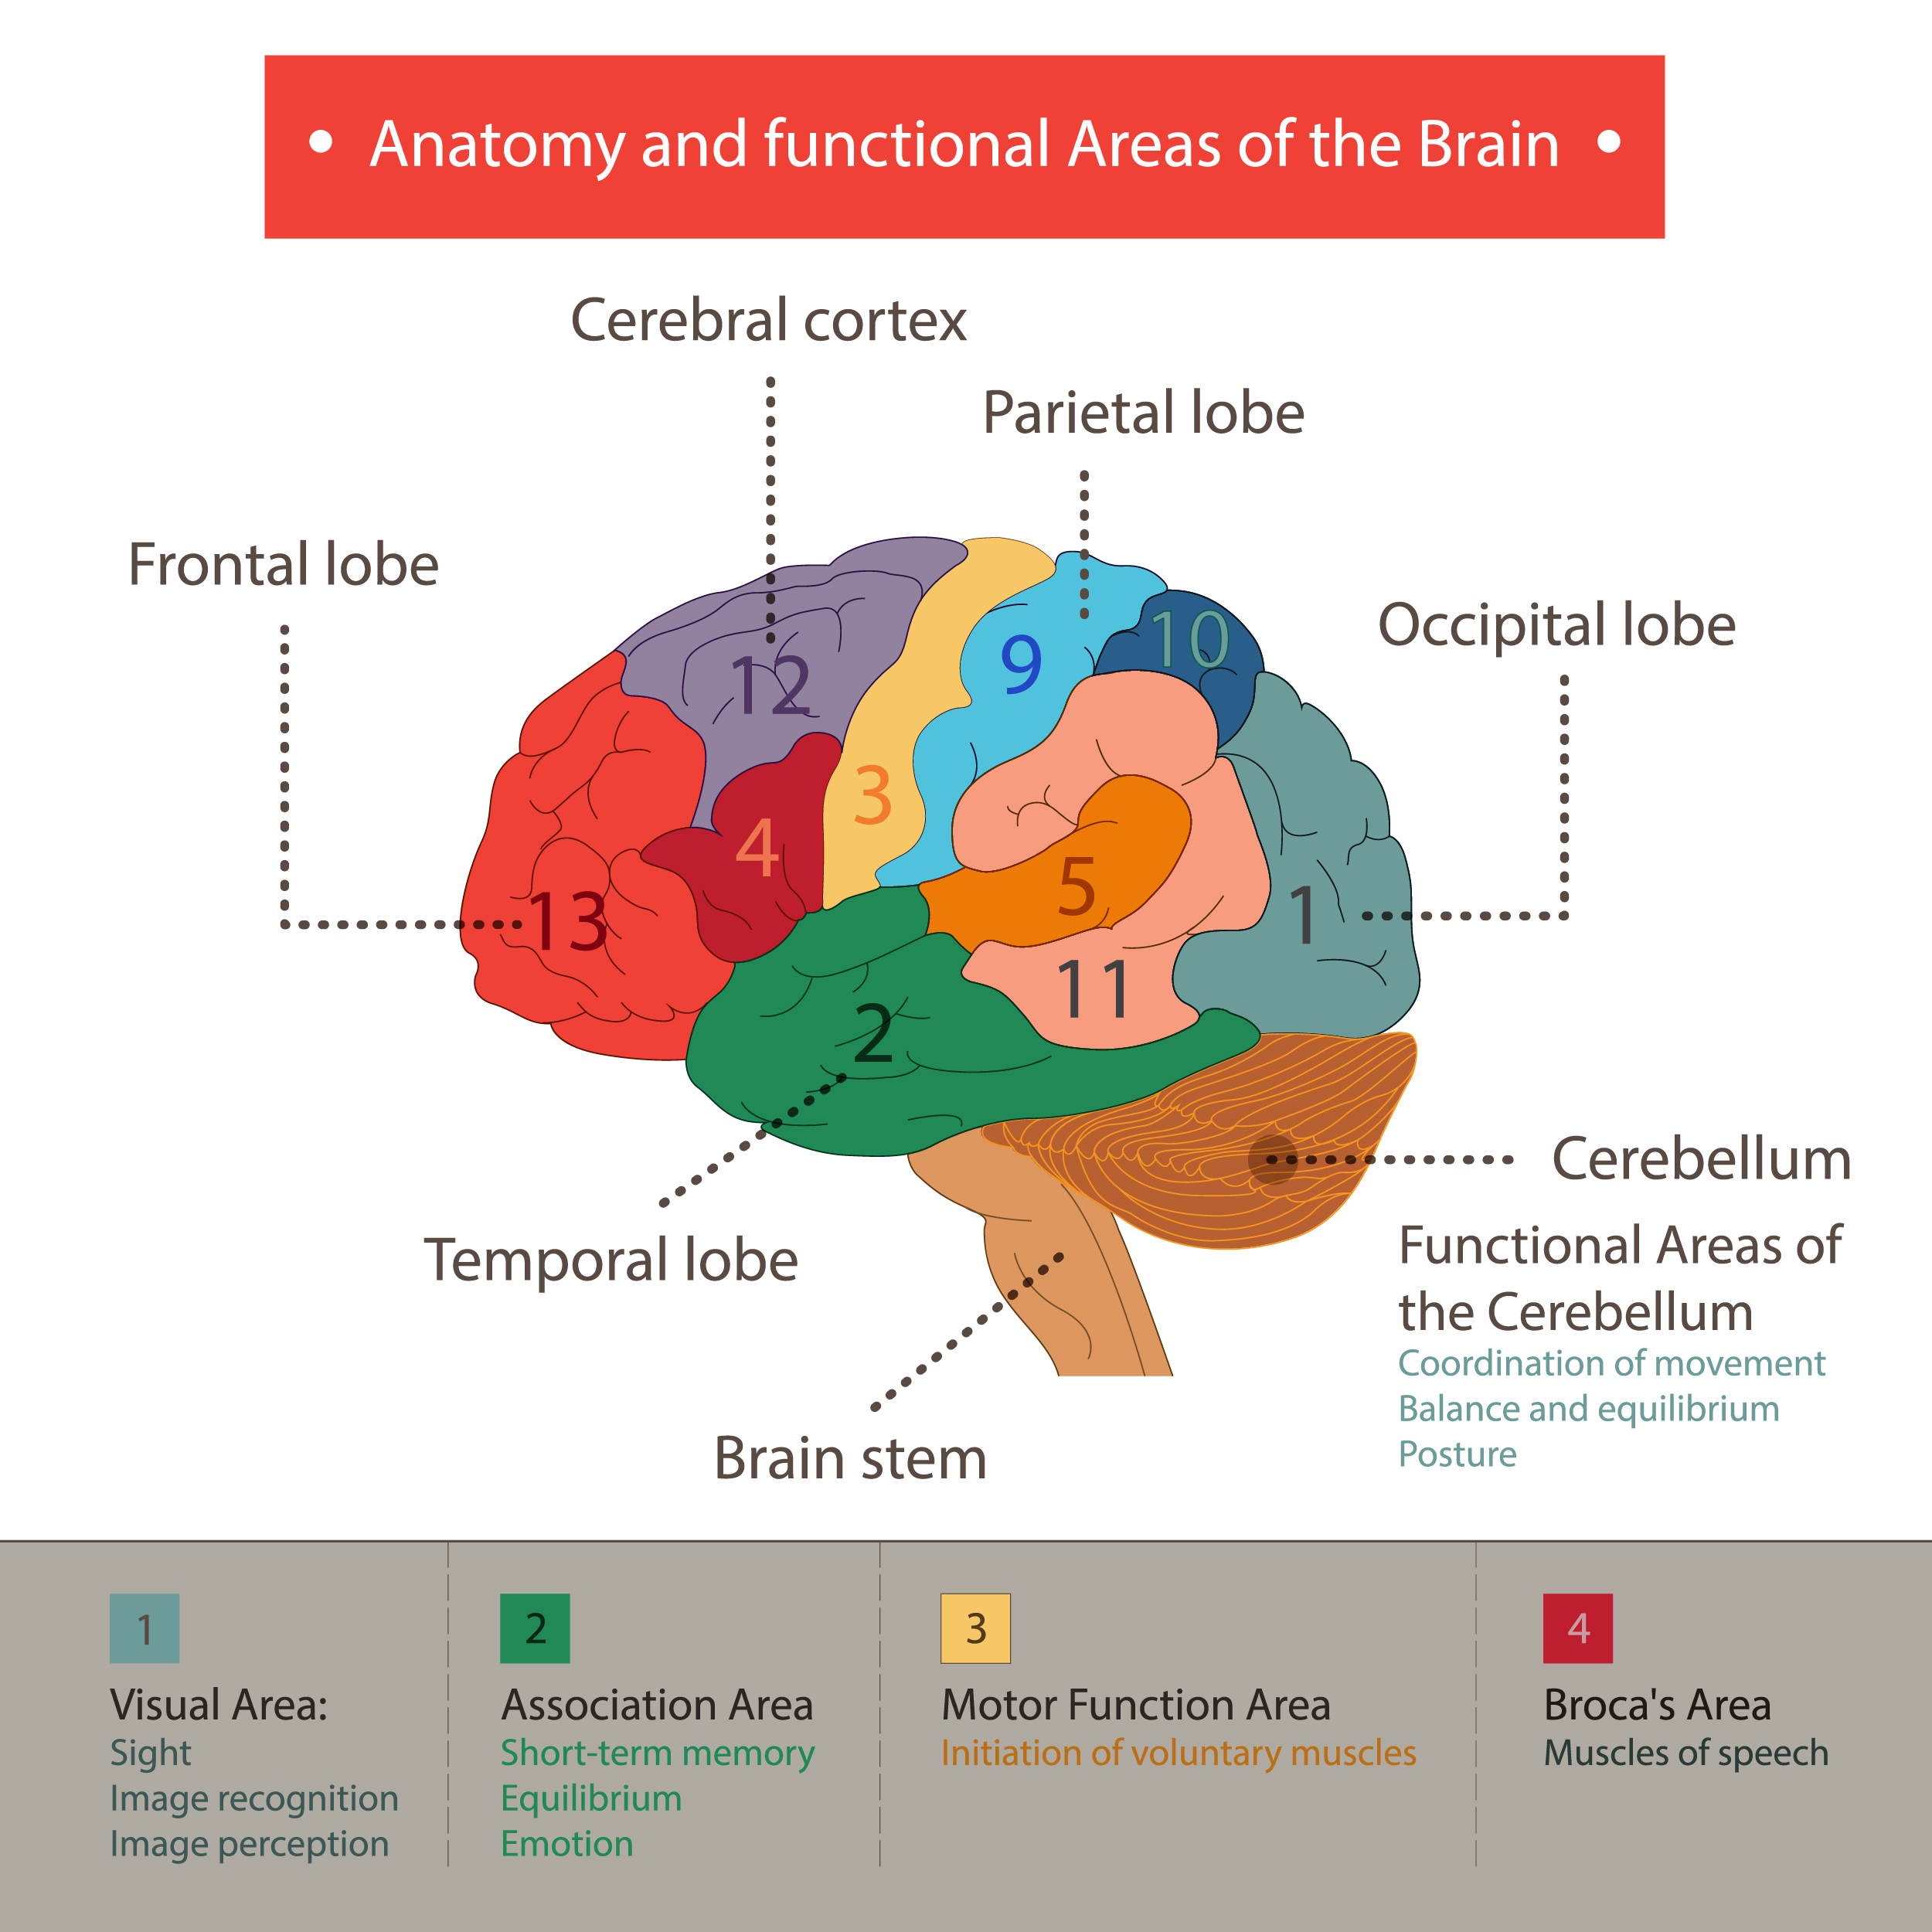 What are cognitive functions and when do we use them?